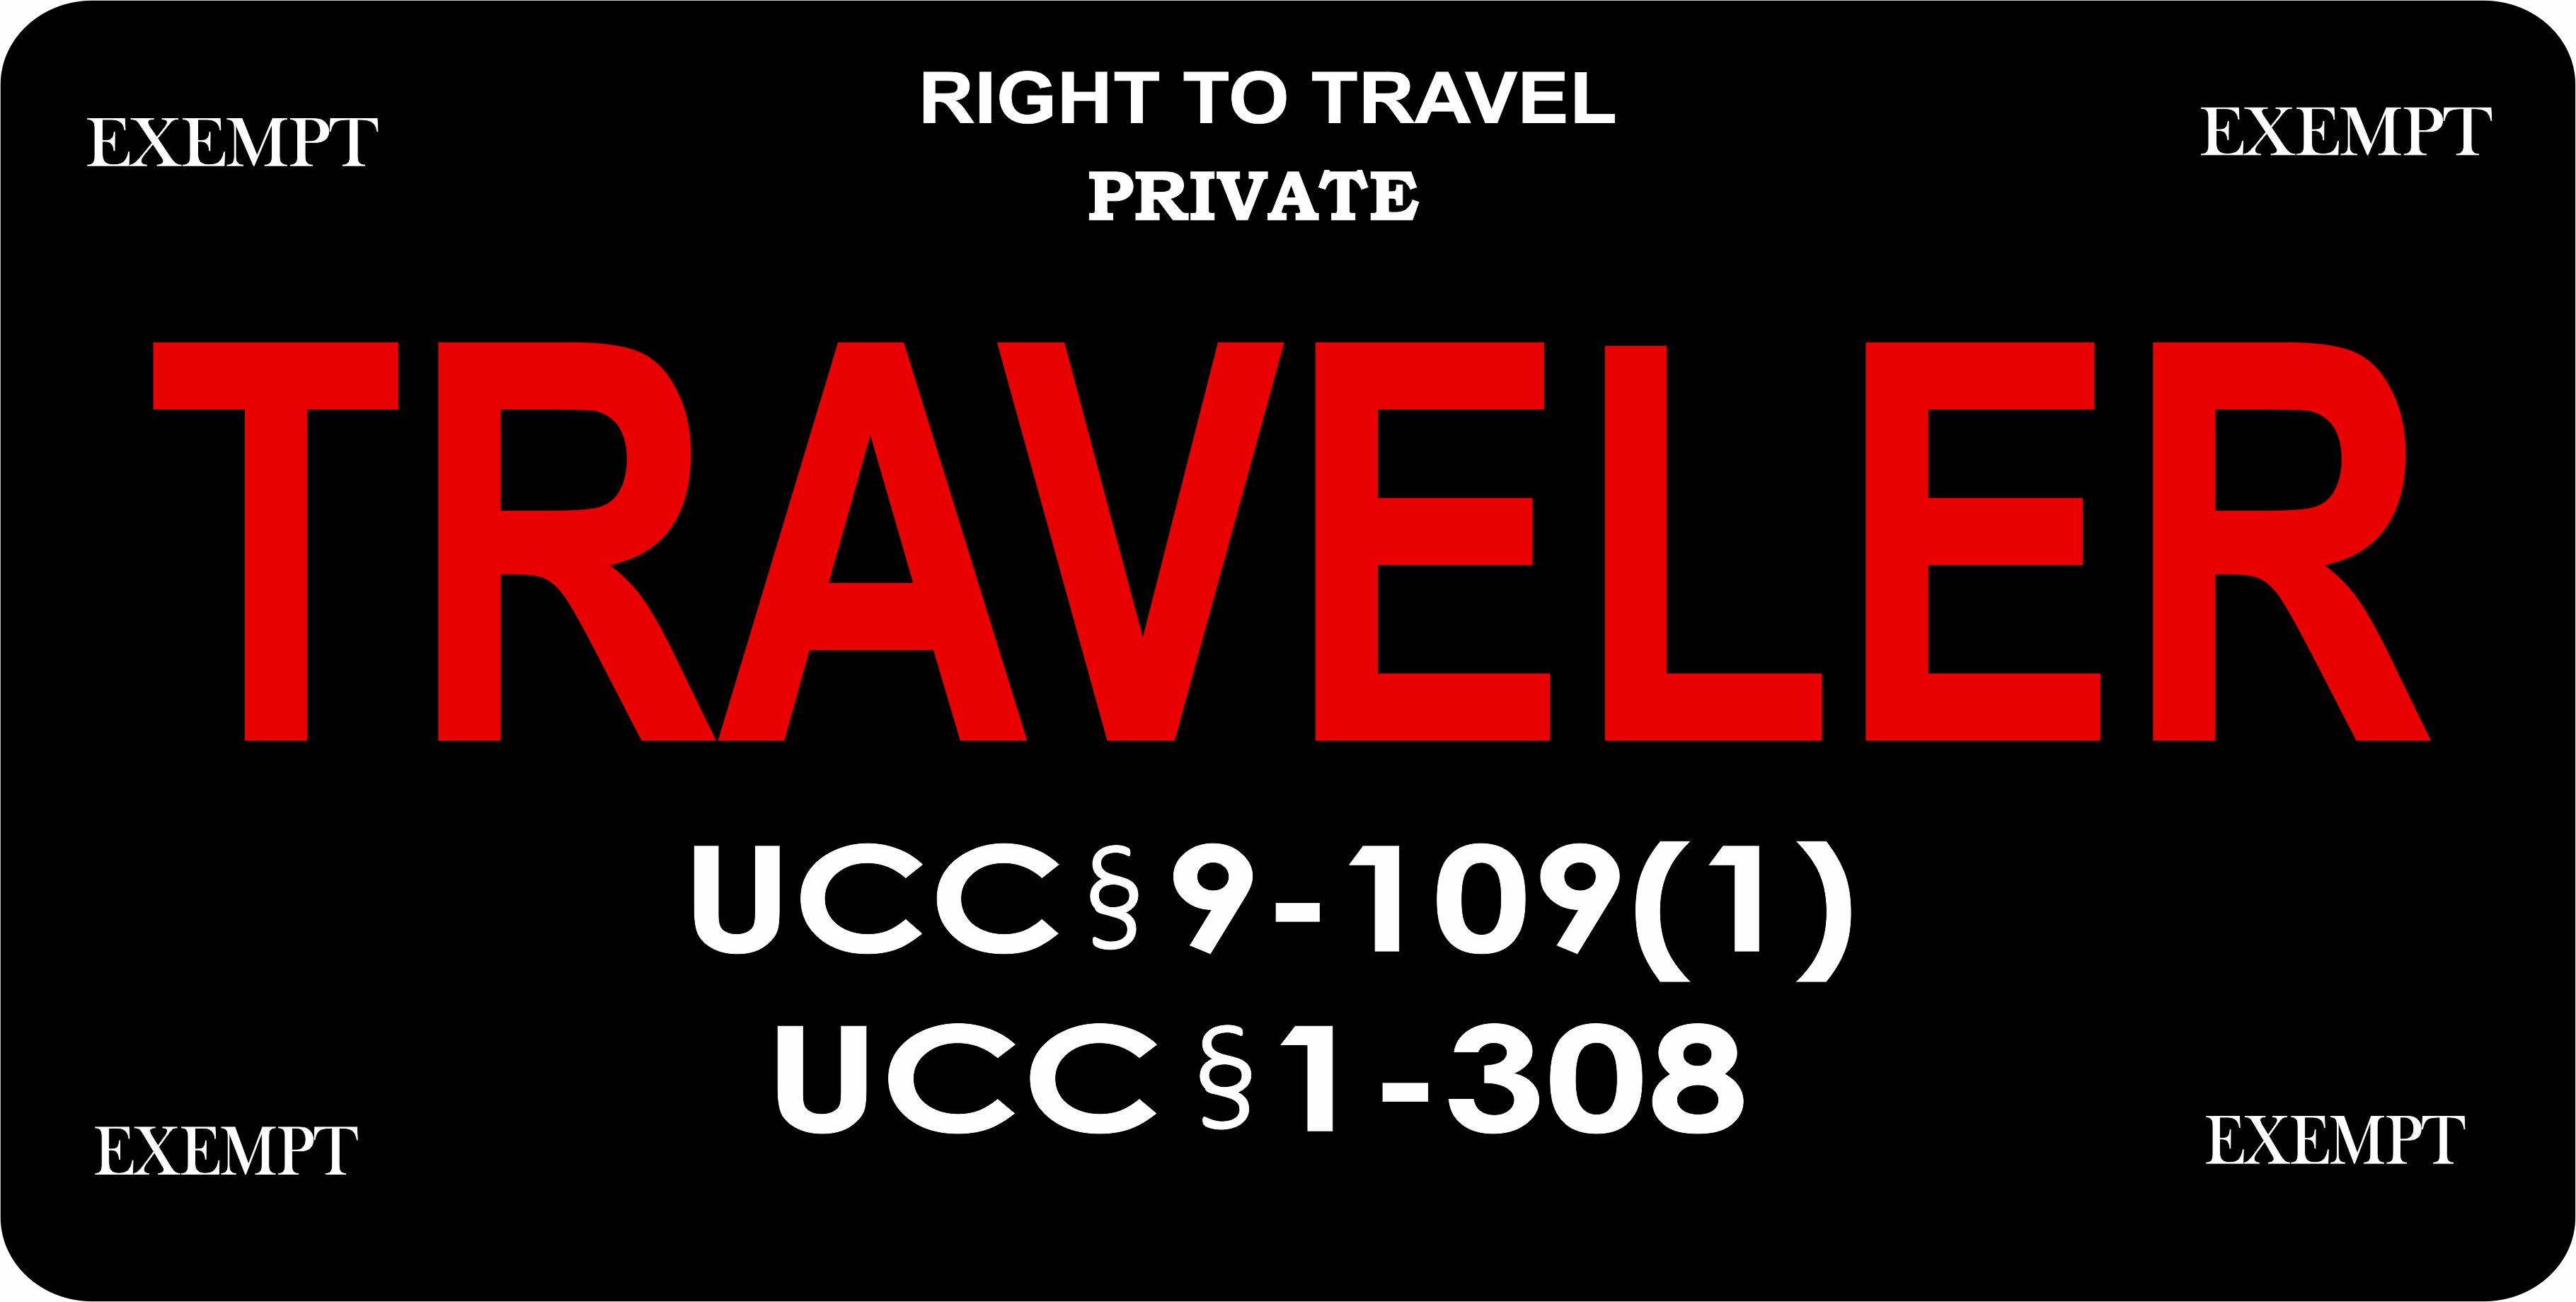 Traveler Right To Travel Red Letters On Black Photo LICENSE PLATE